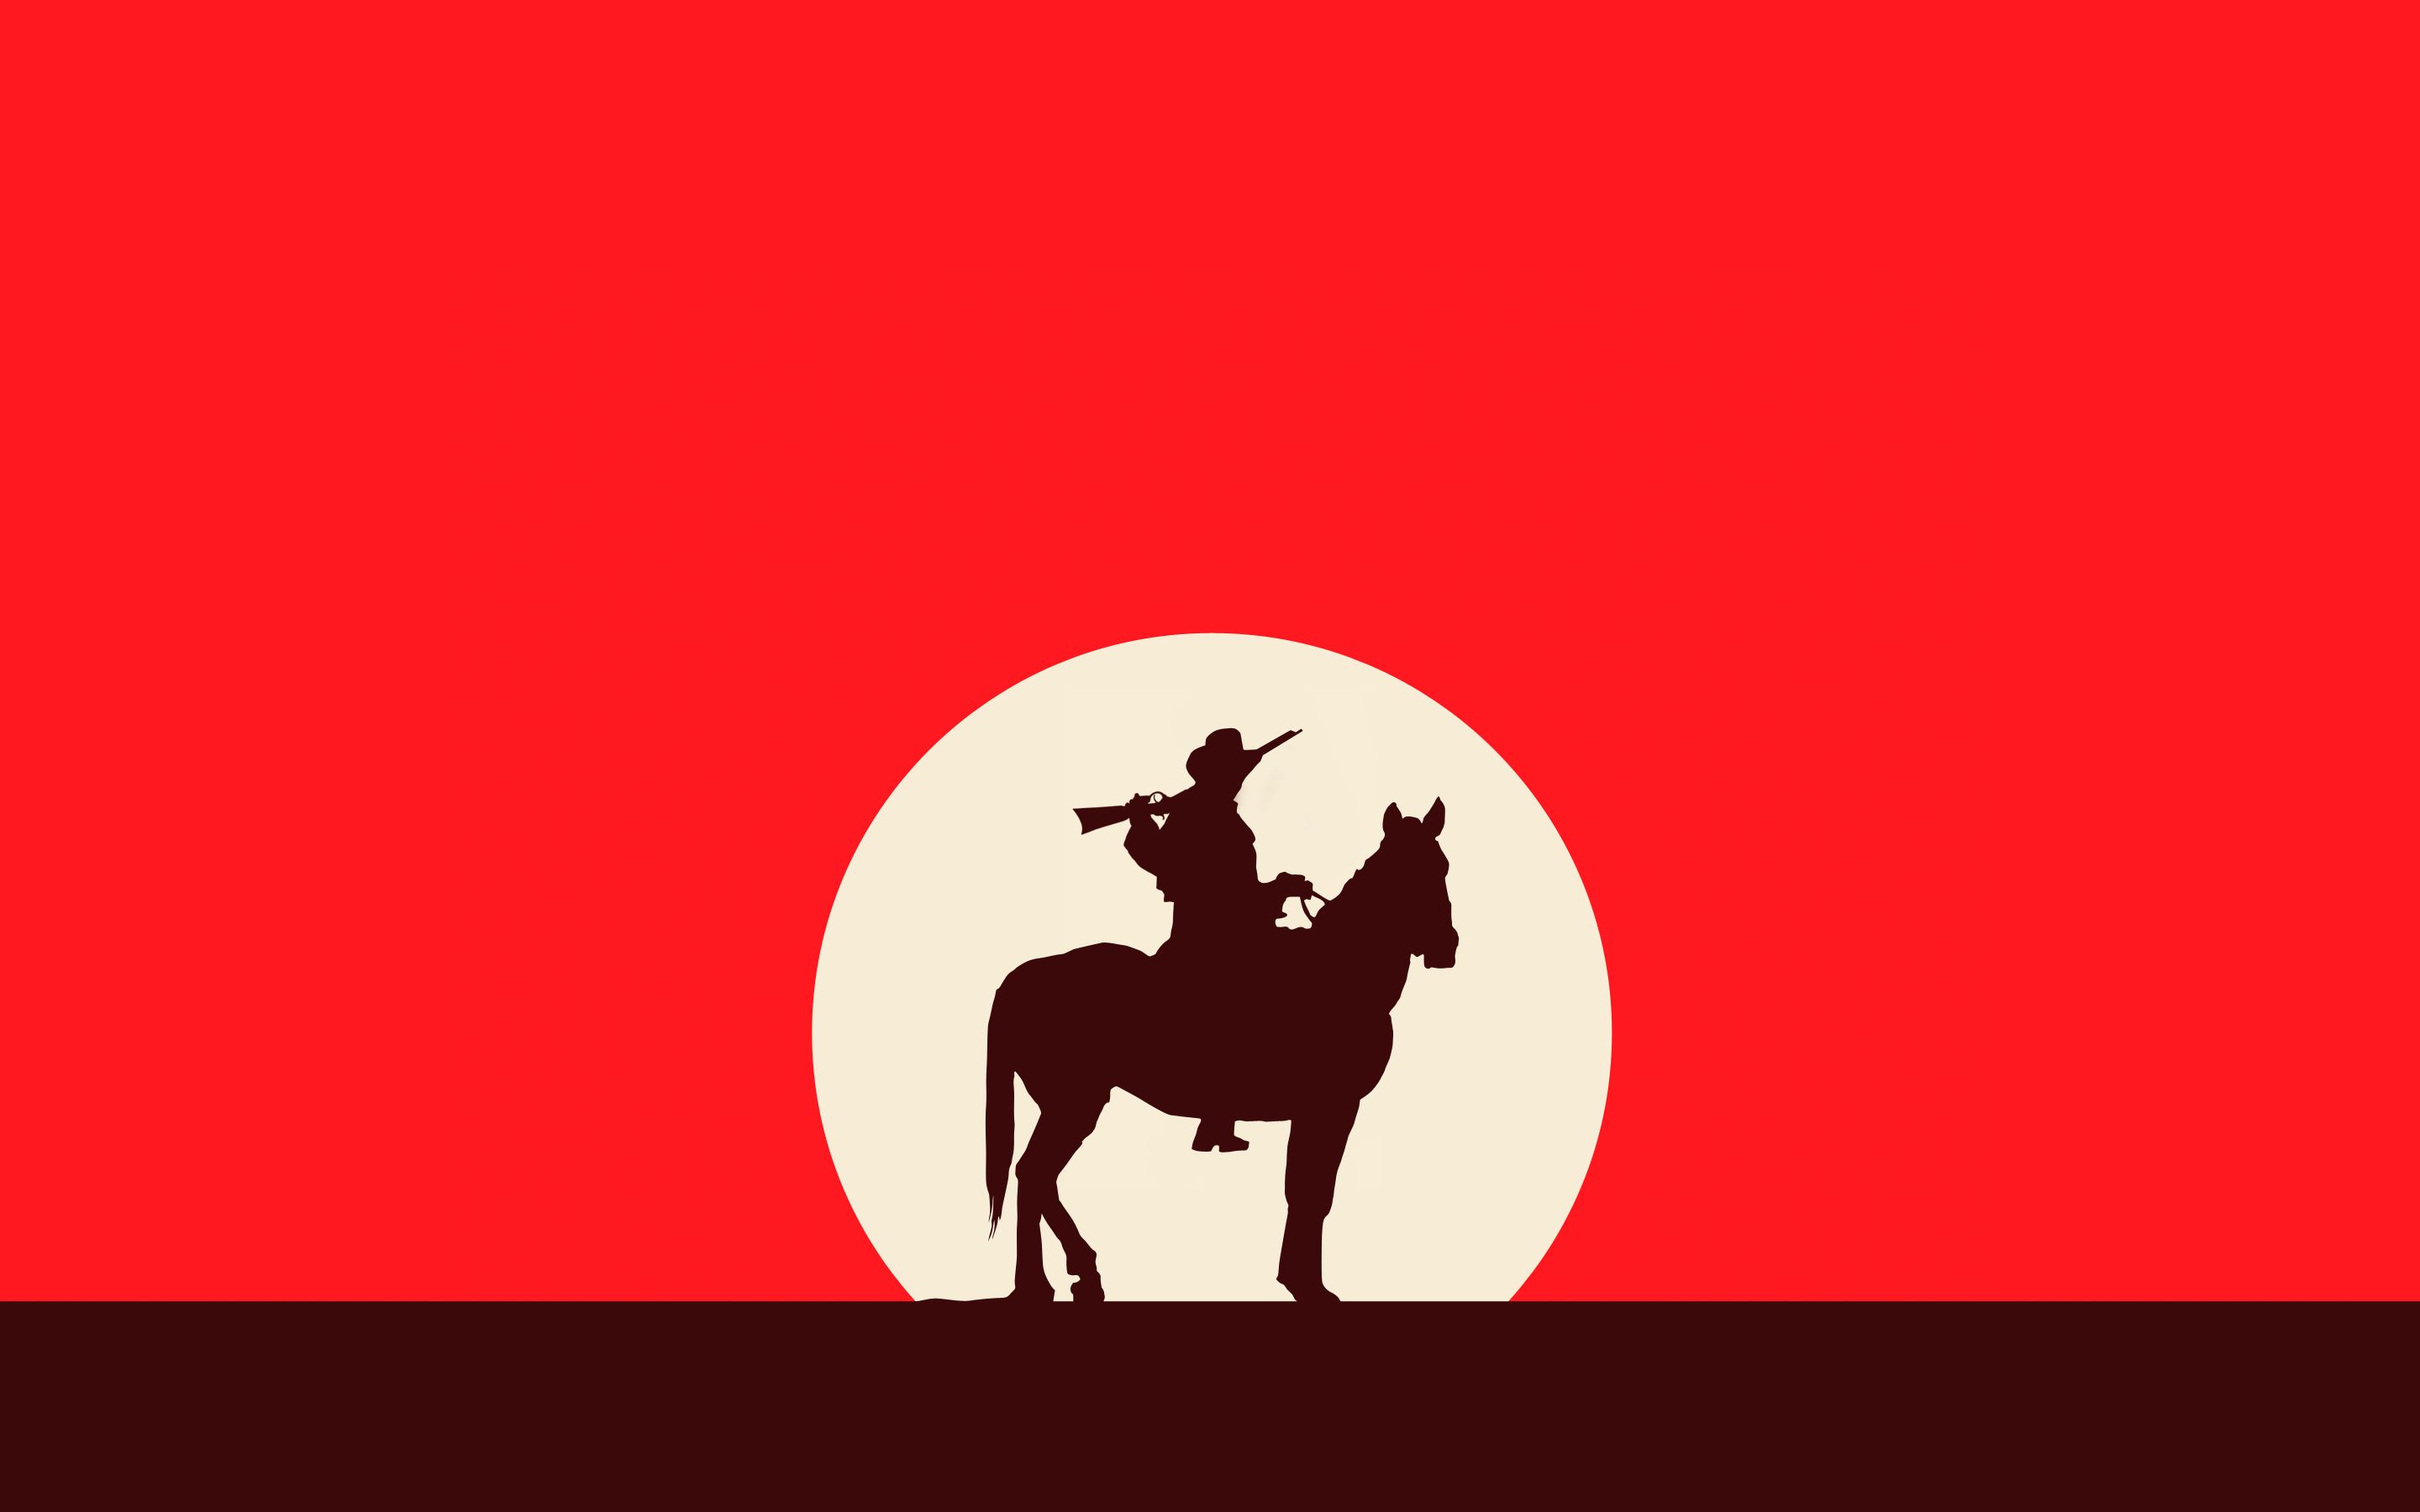 western, artistic, cowboy, horse, red dead redemption, red